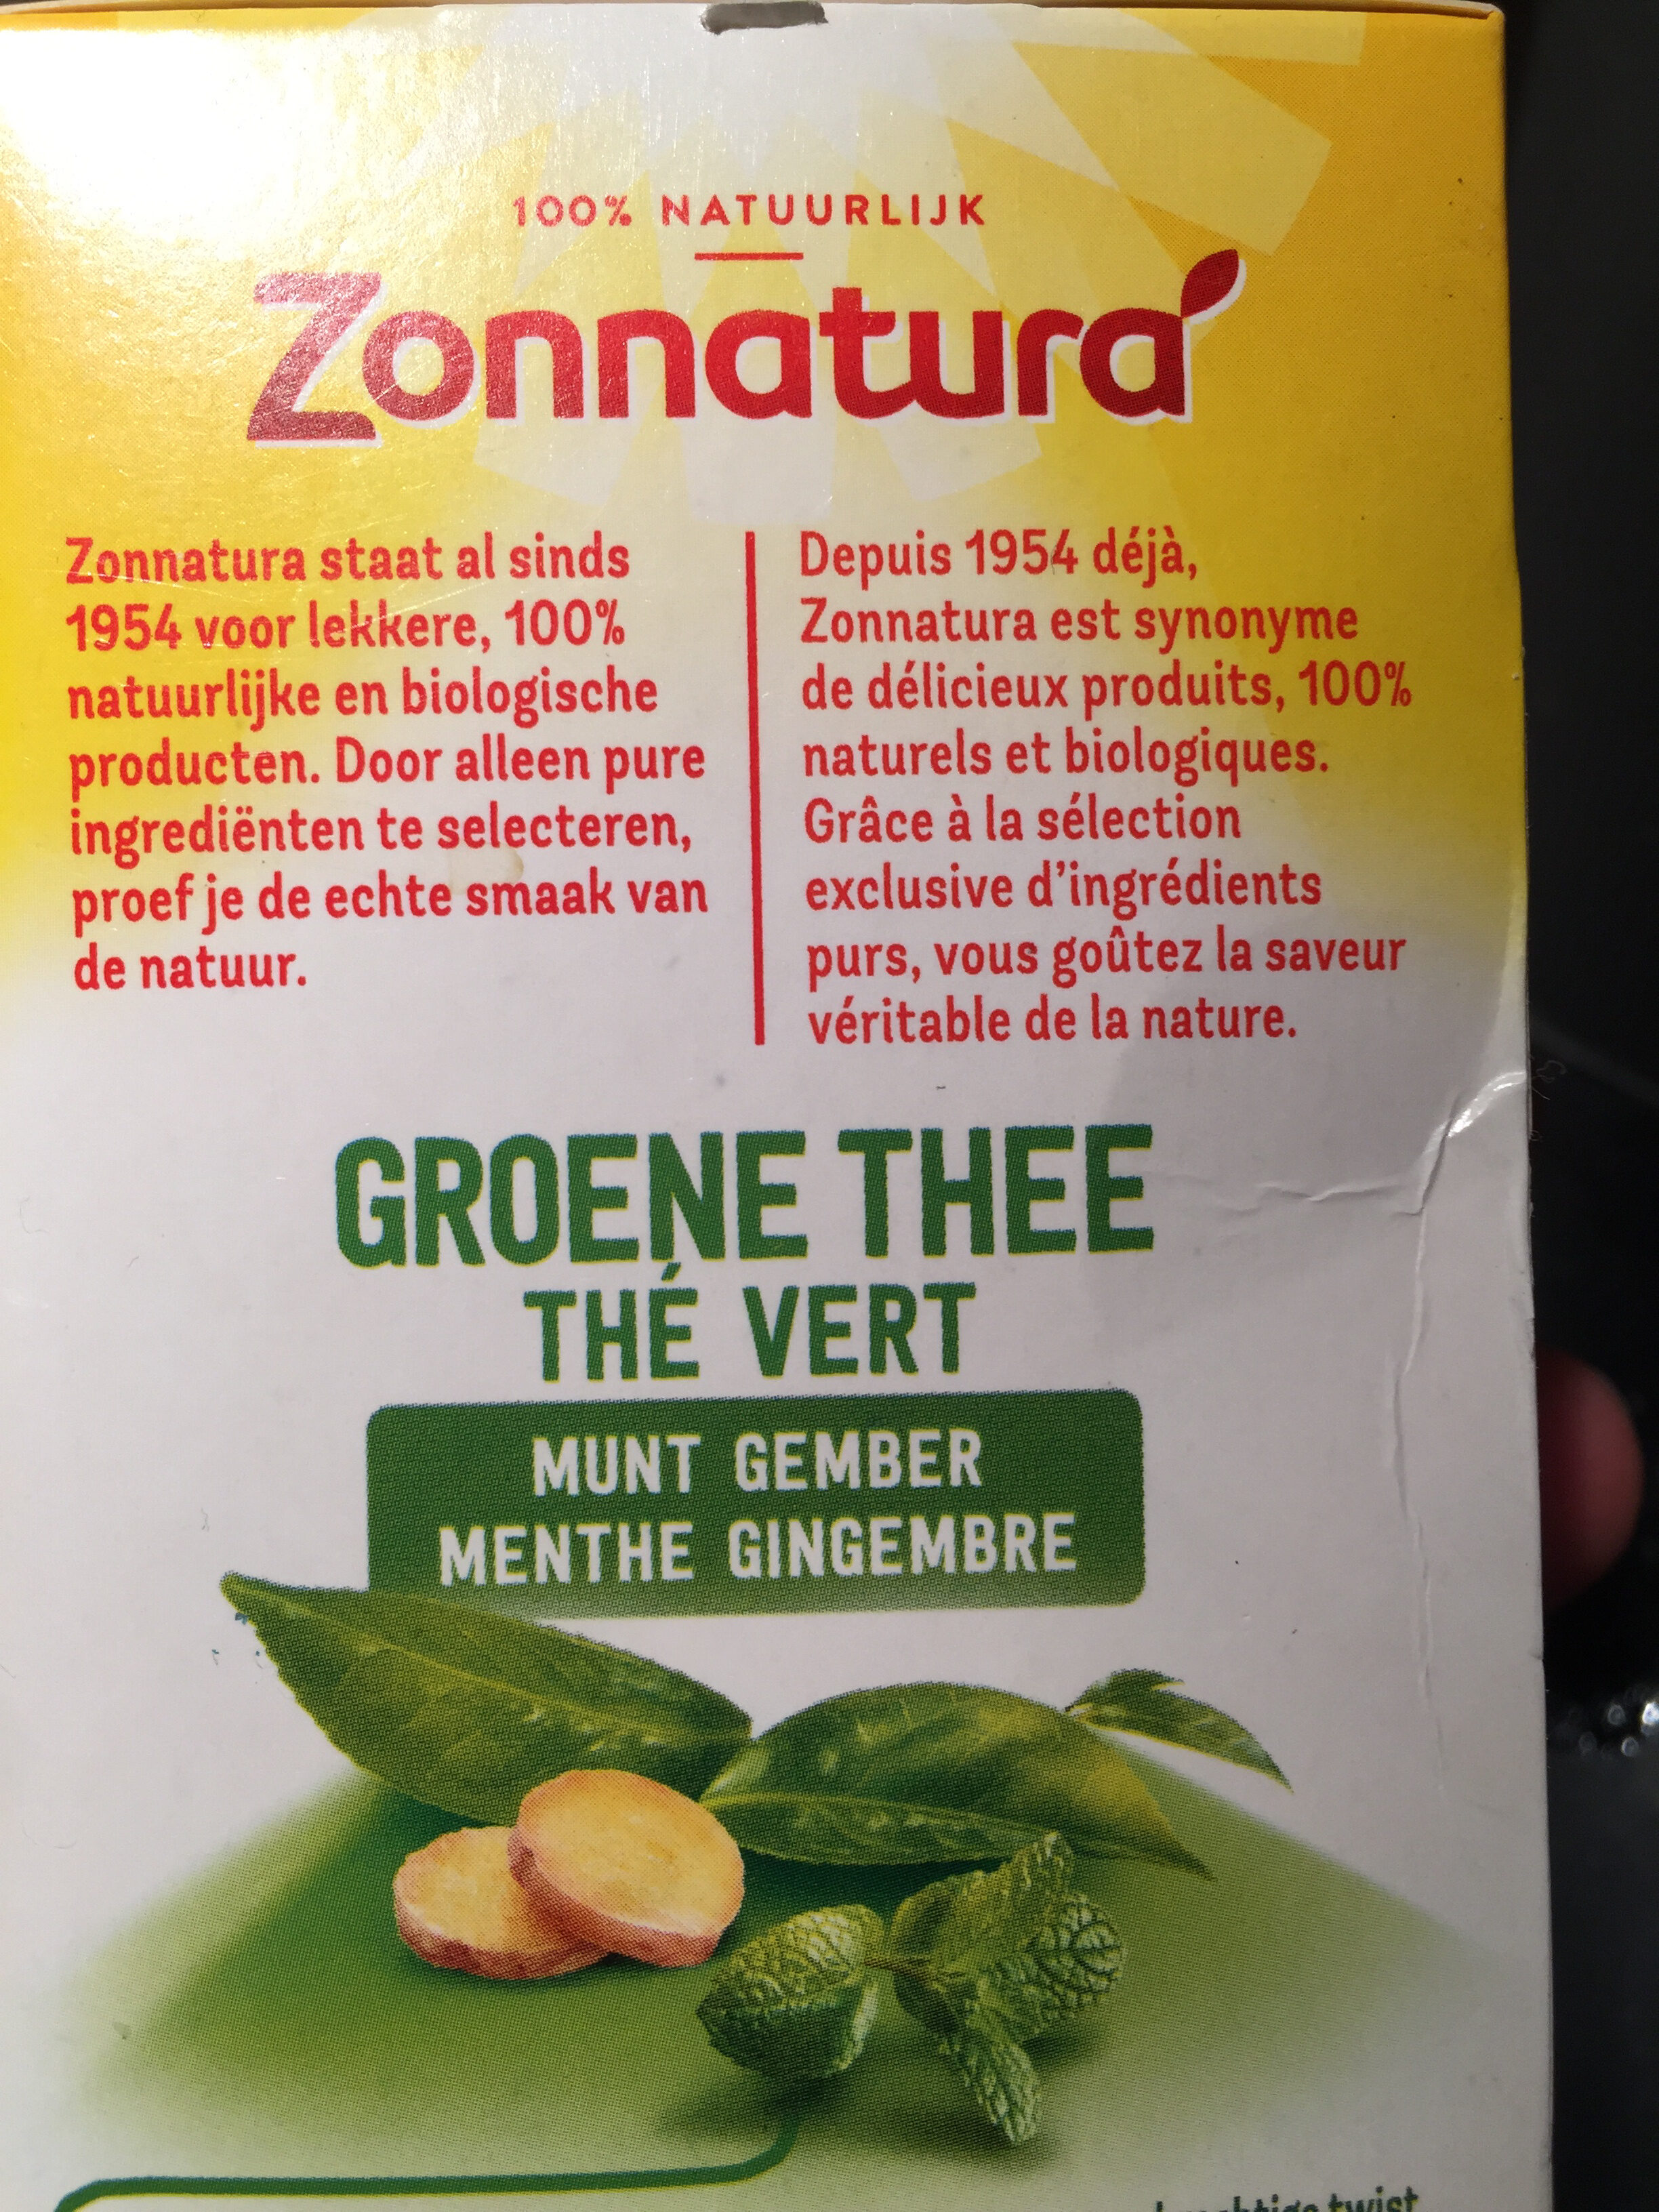 Zonnatura green thee - Tableau nutritionnel - nl